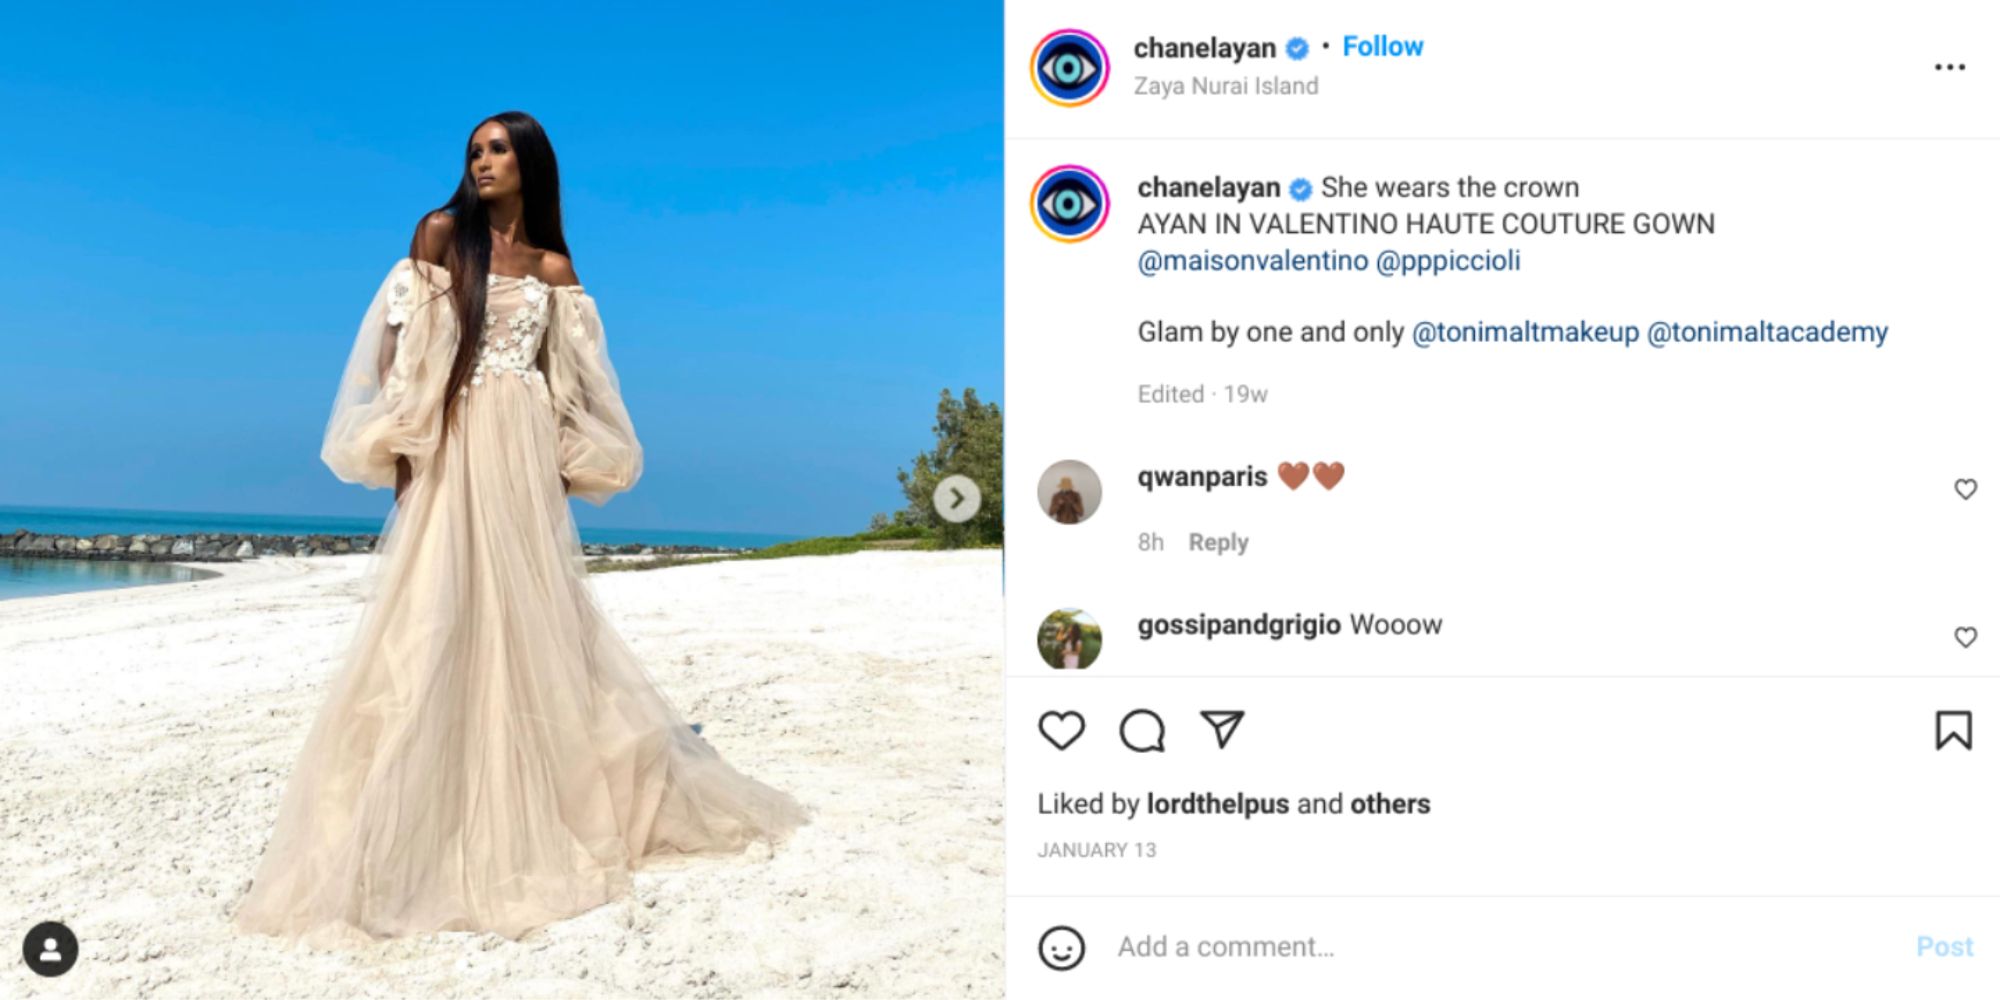 An image of Chanel Ayan standing in a dress and her Instagram page